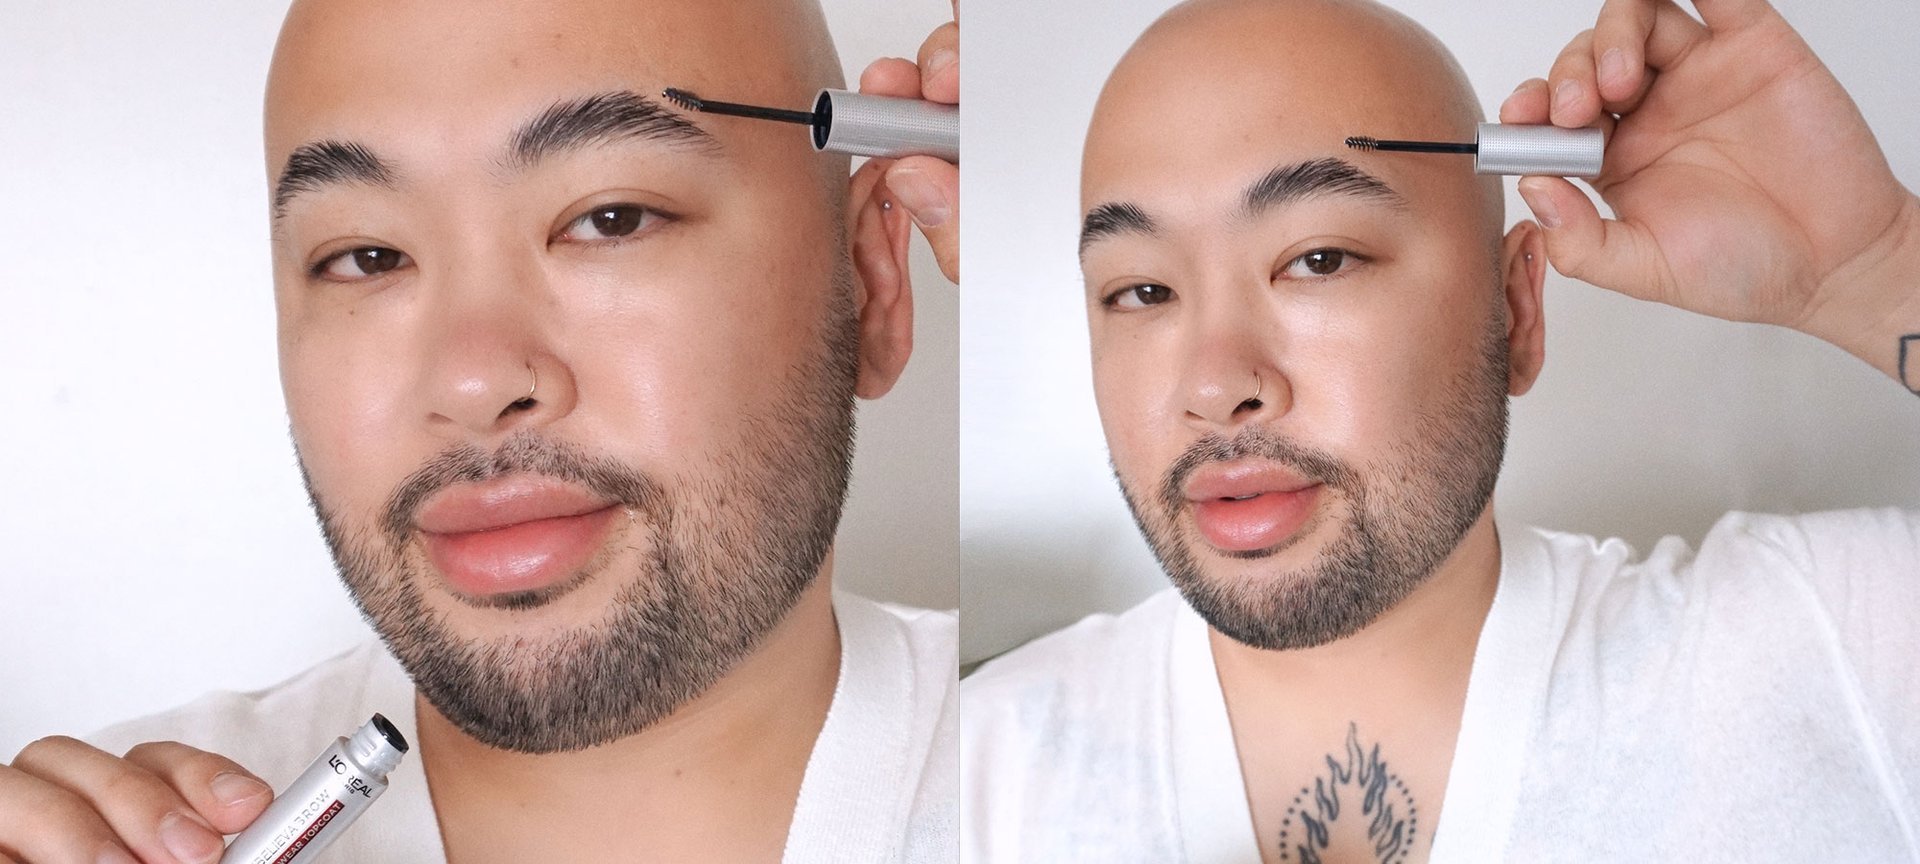 Face time: is makeup for men the next big beauty trend?, Makeup